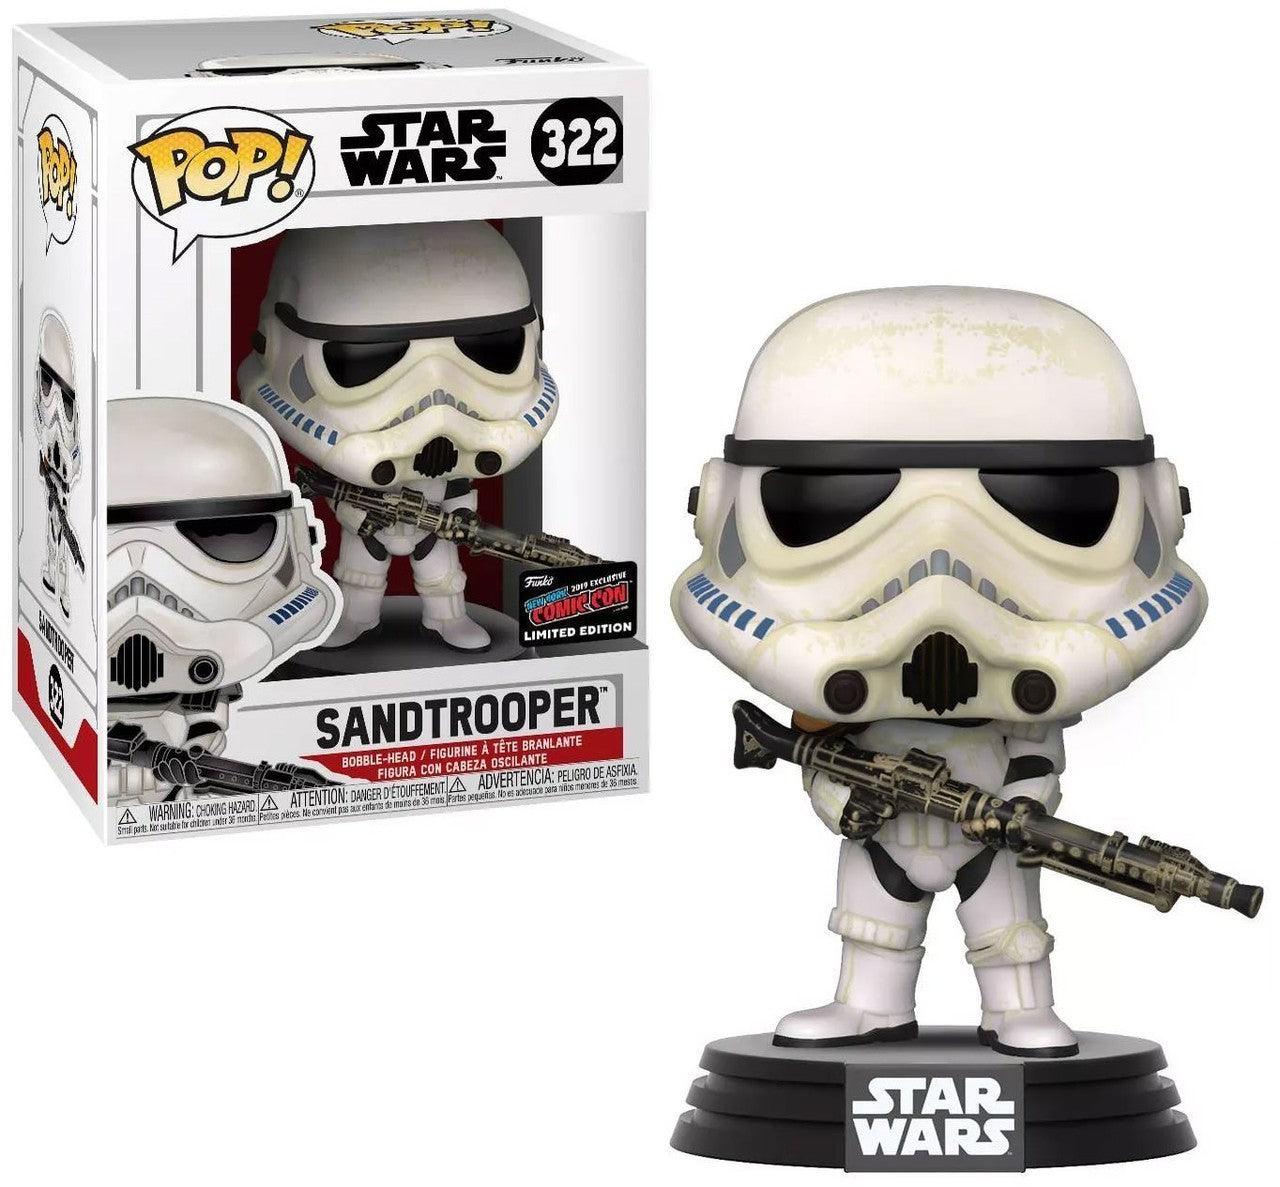 Pop! Star Wars - Sandtrooper - #322 - 2019 New York Comic Con EXCLUSIVE LIMITED Edition - Hobby Champion Inc